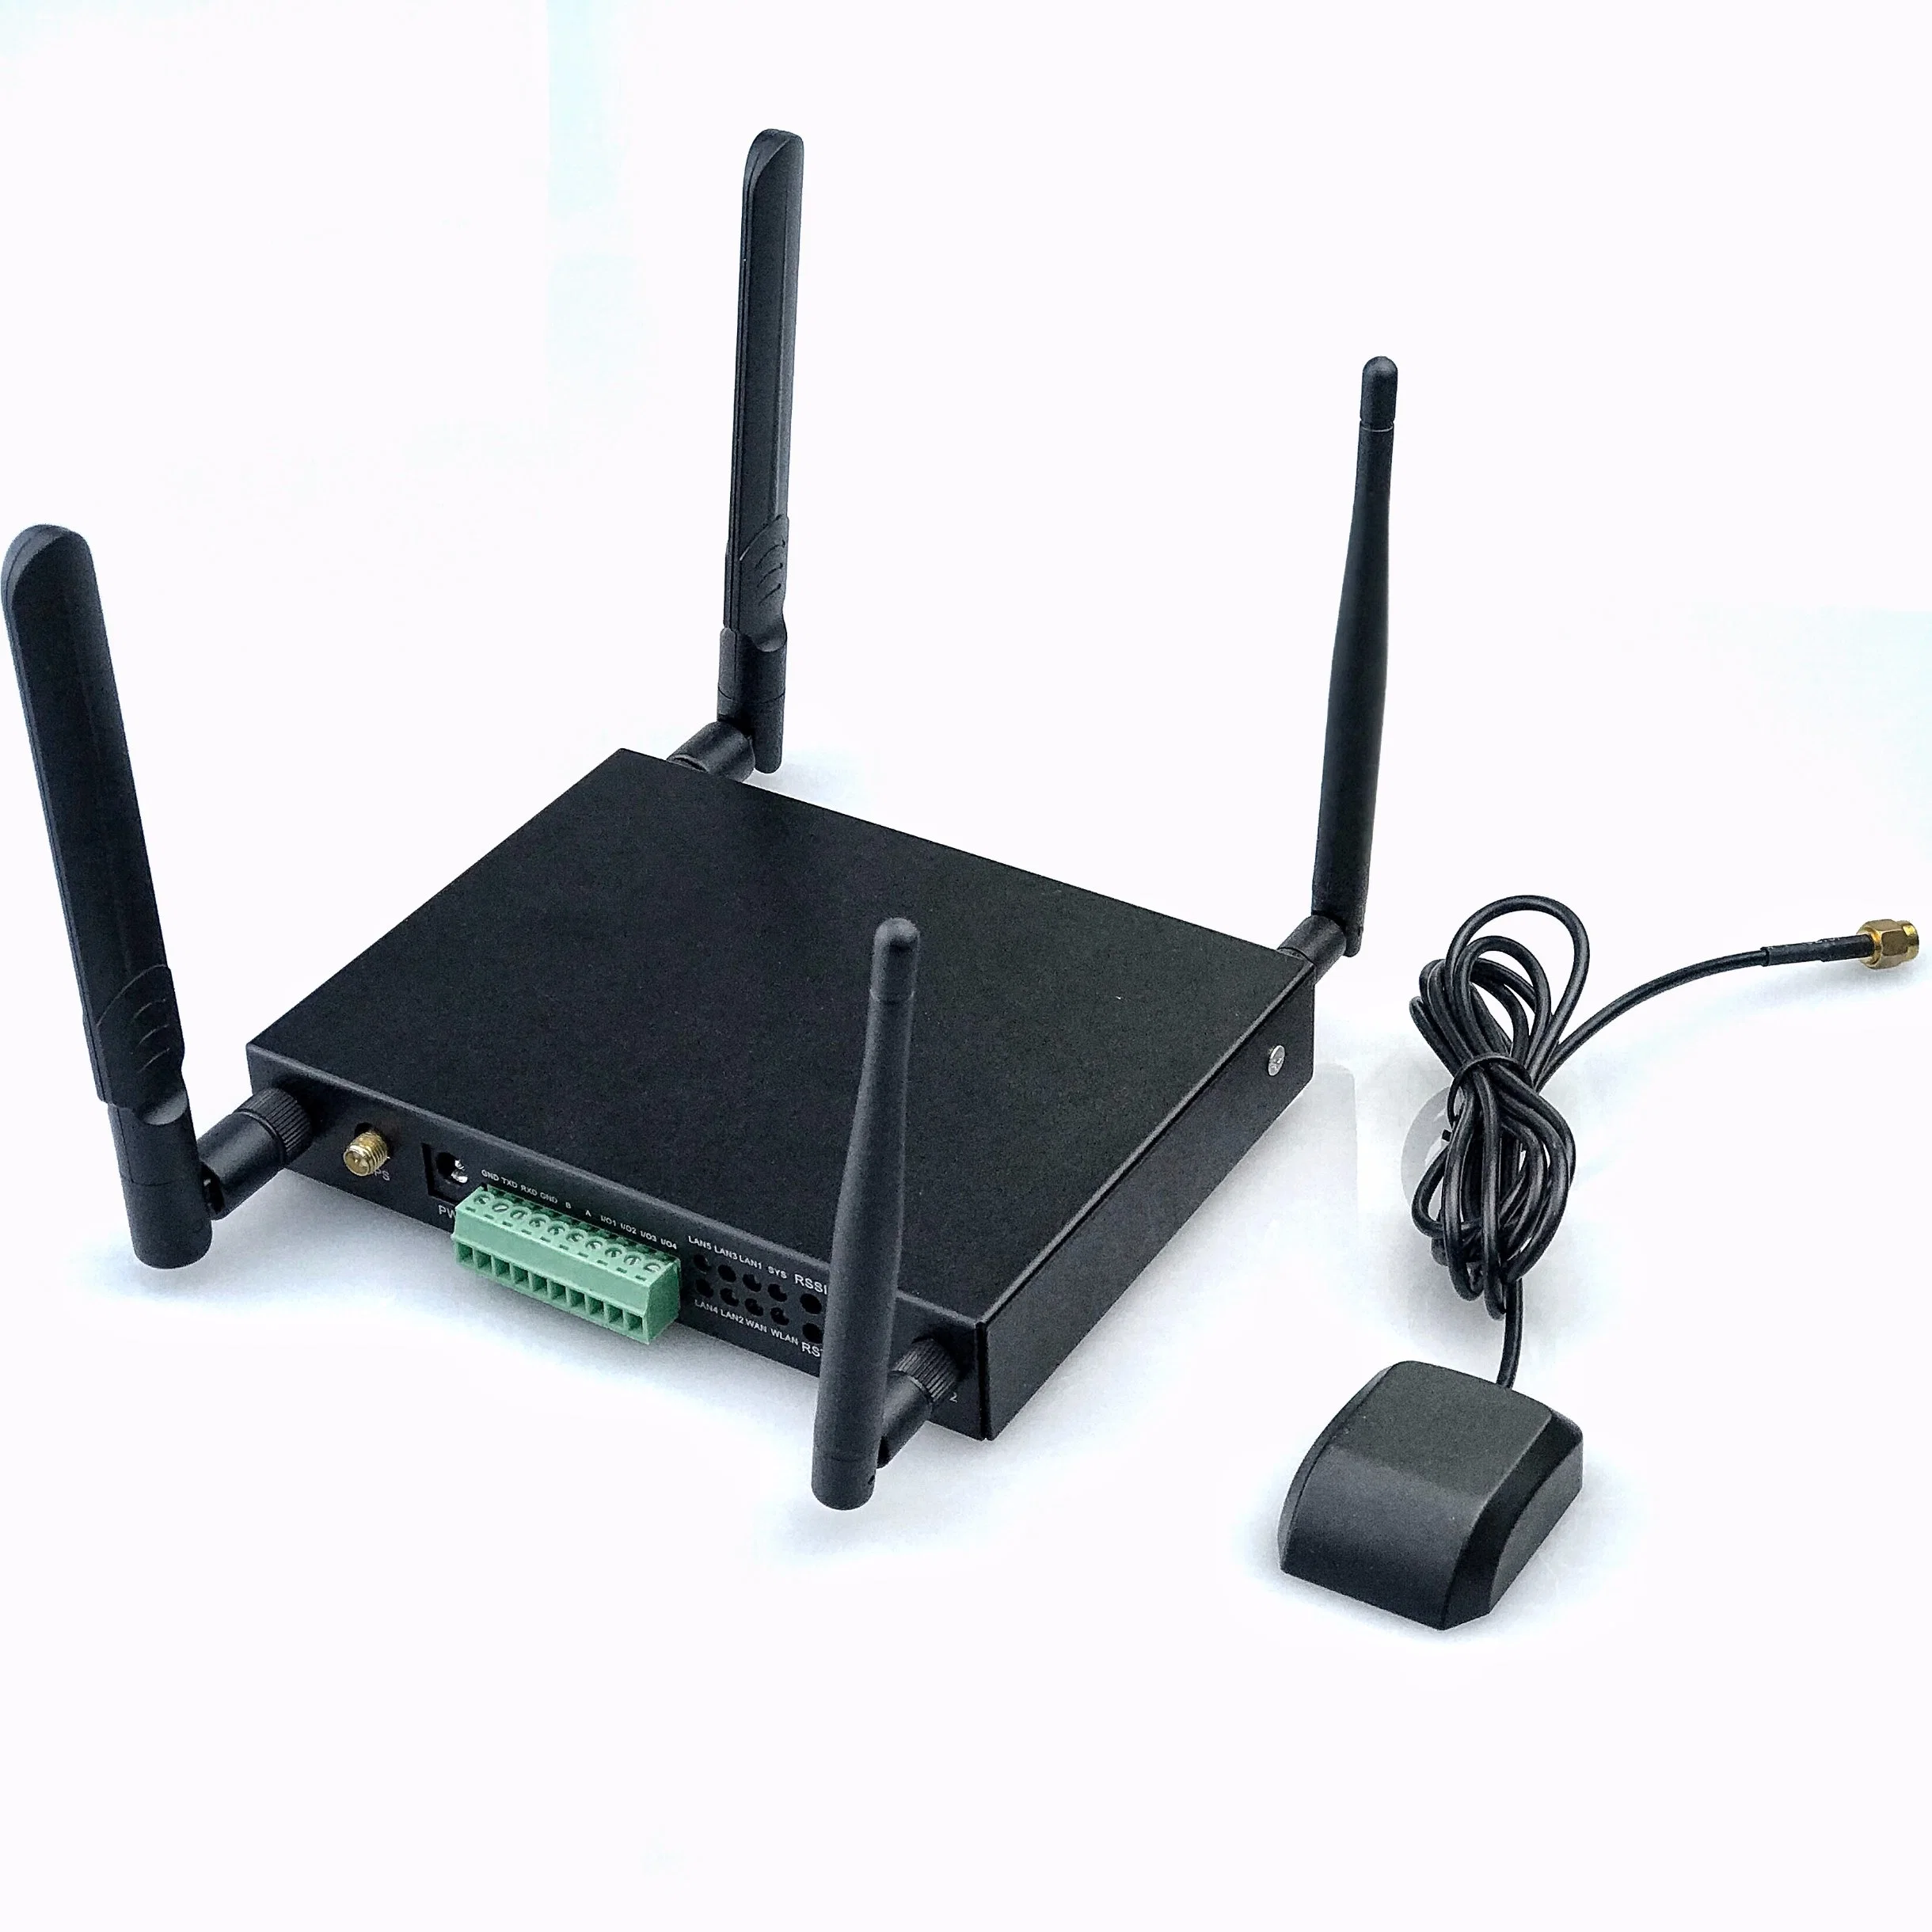 New M2m Industrial Cellular Router Wireless 4G Cellular Router with Dual SIM Card